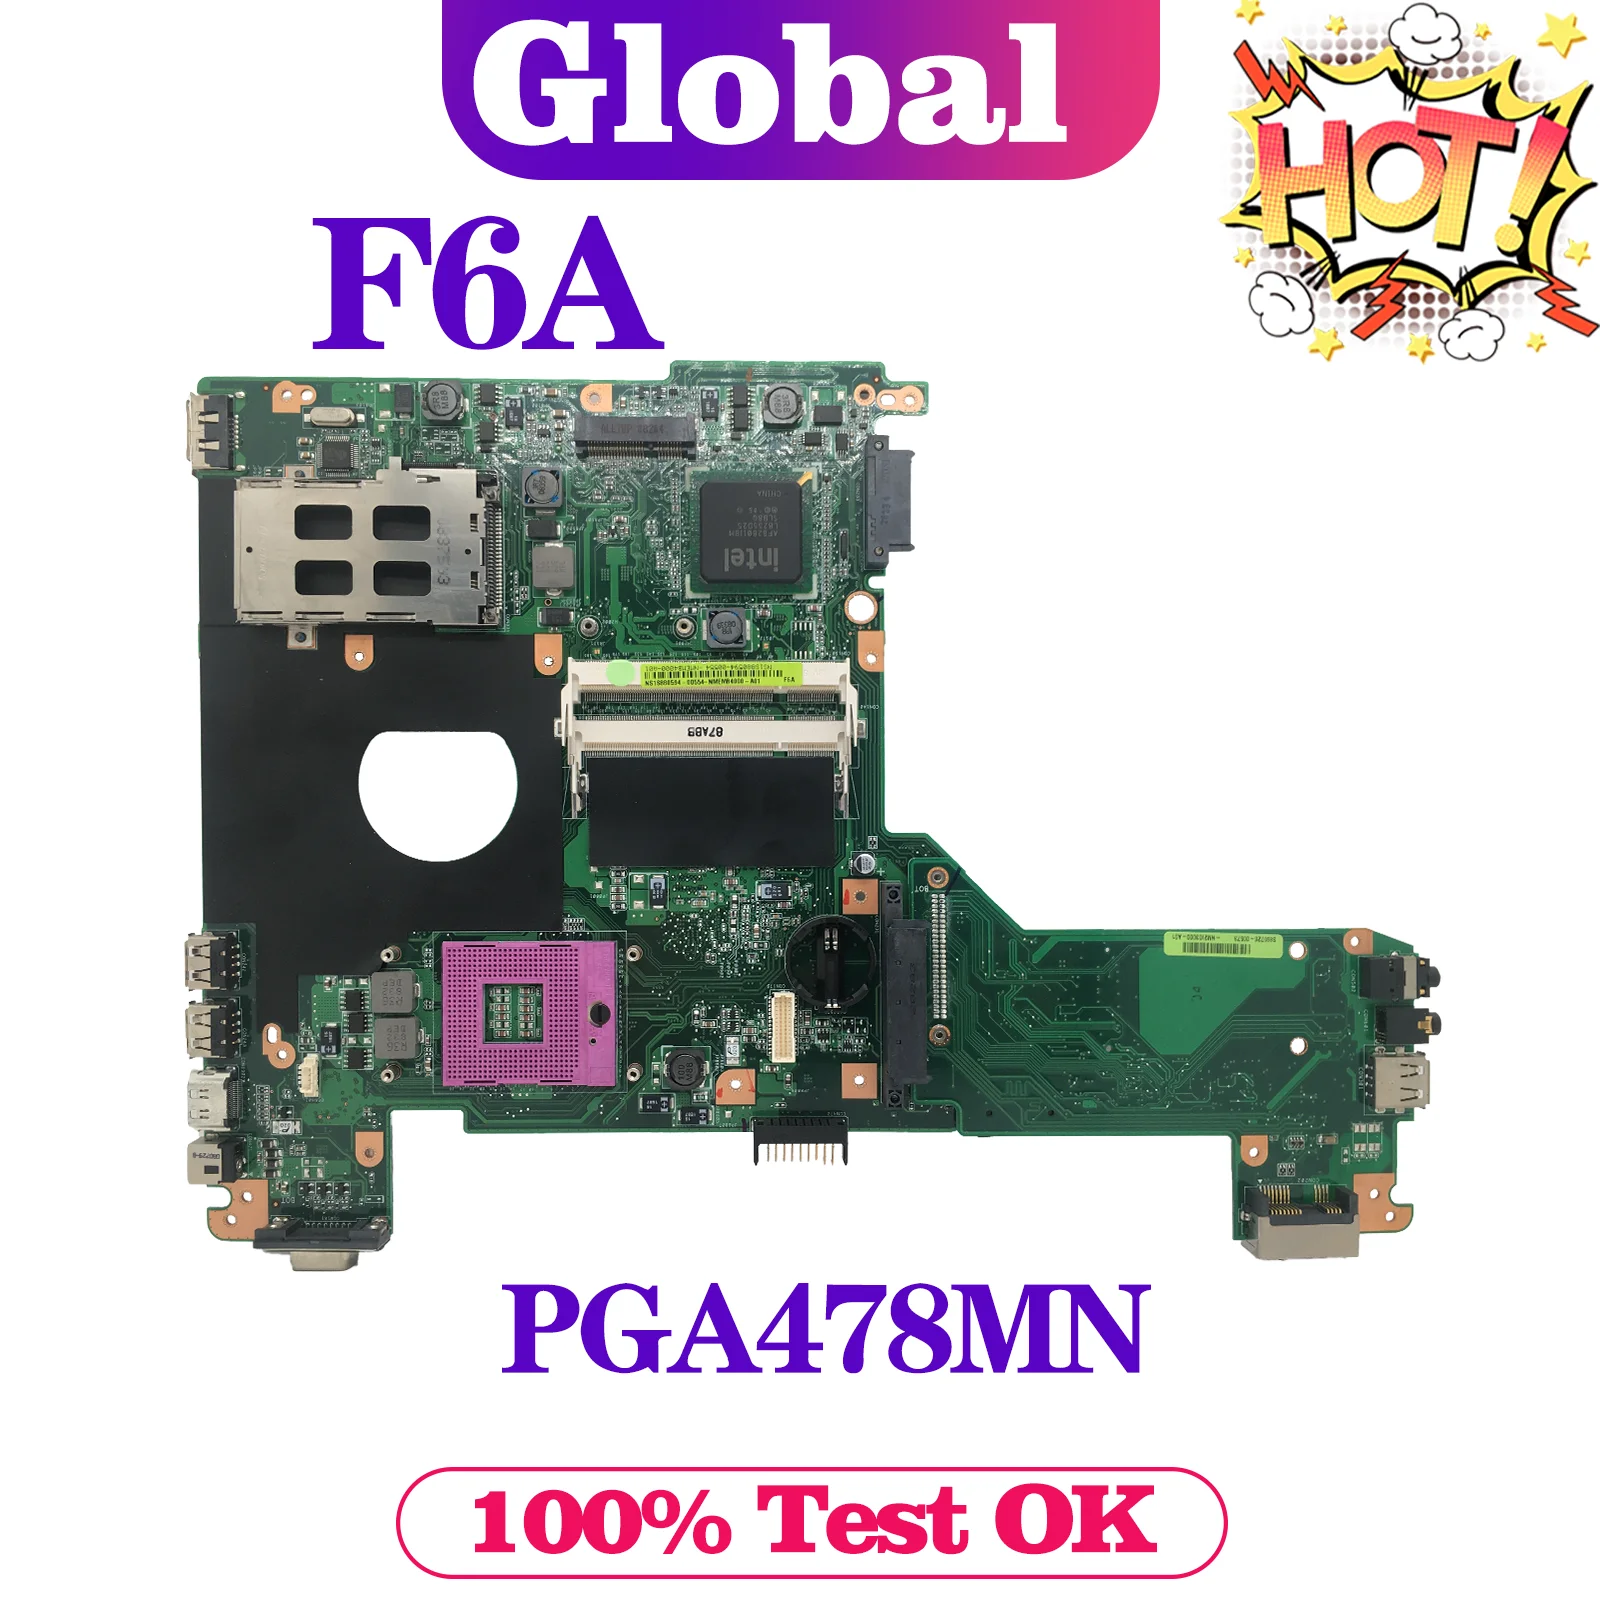 

Notebook F6A Mainboard For ASUS F6 Laptop Motherboard Support I3 I5 PGA478MN REV:2.1 DDR2 MAIN BOARD GM45